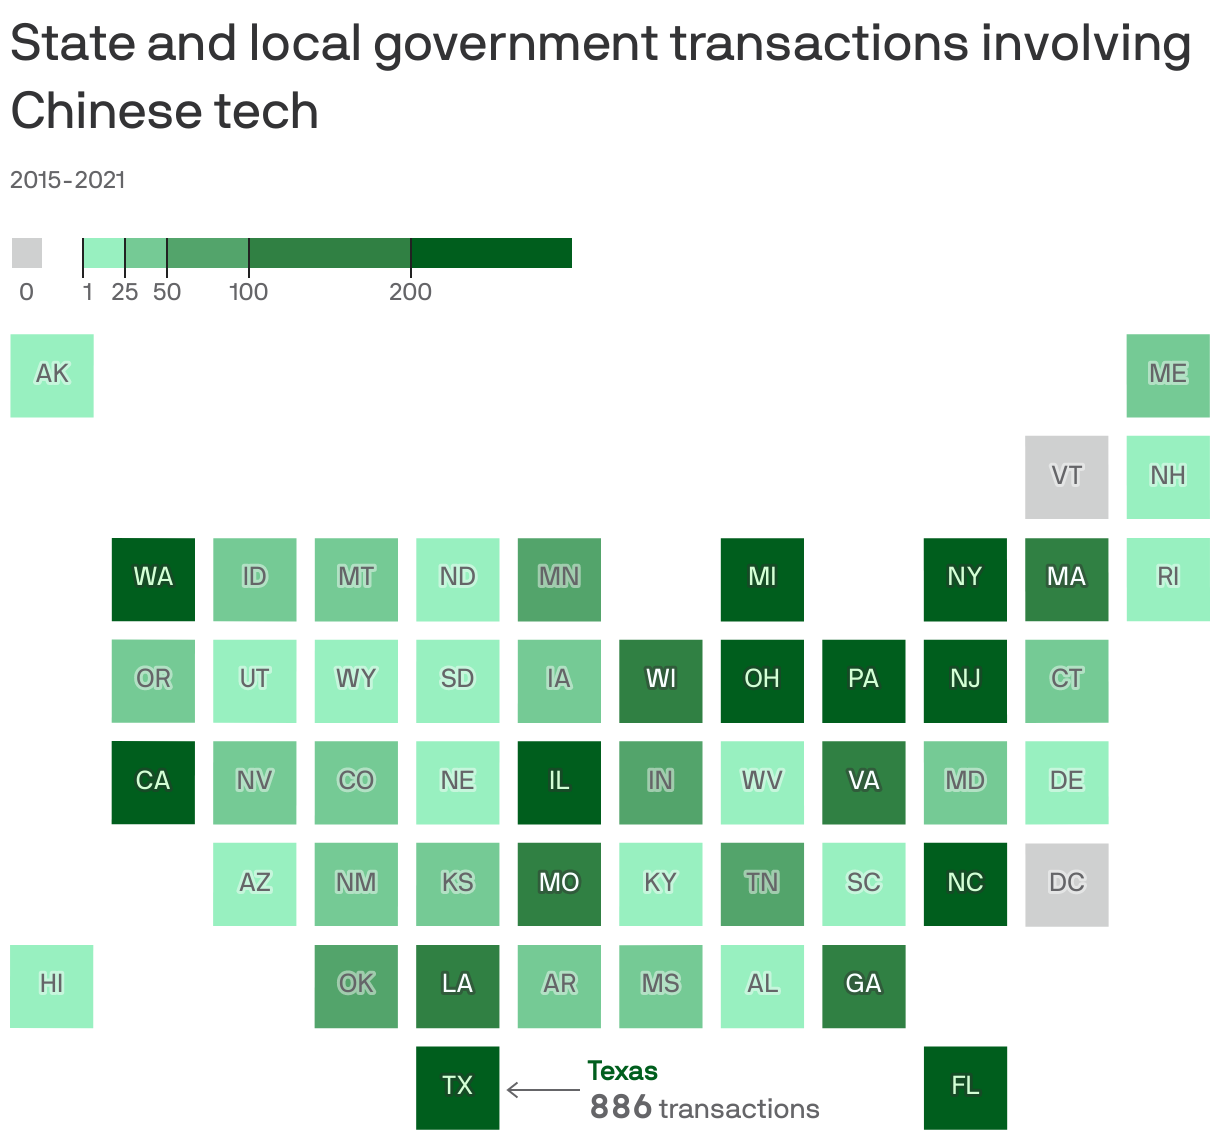 State and local government transactions involving Chinese tech